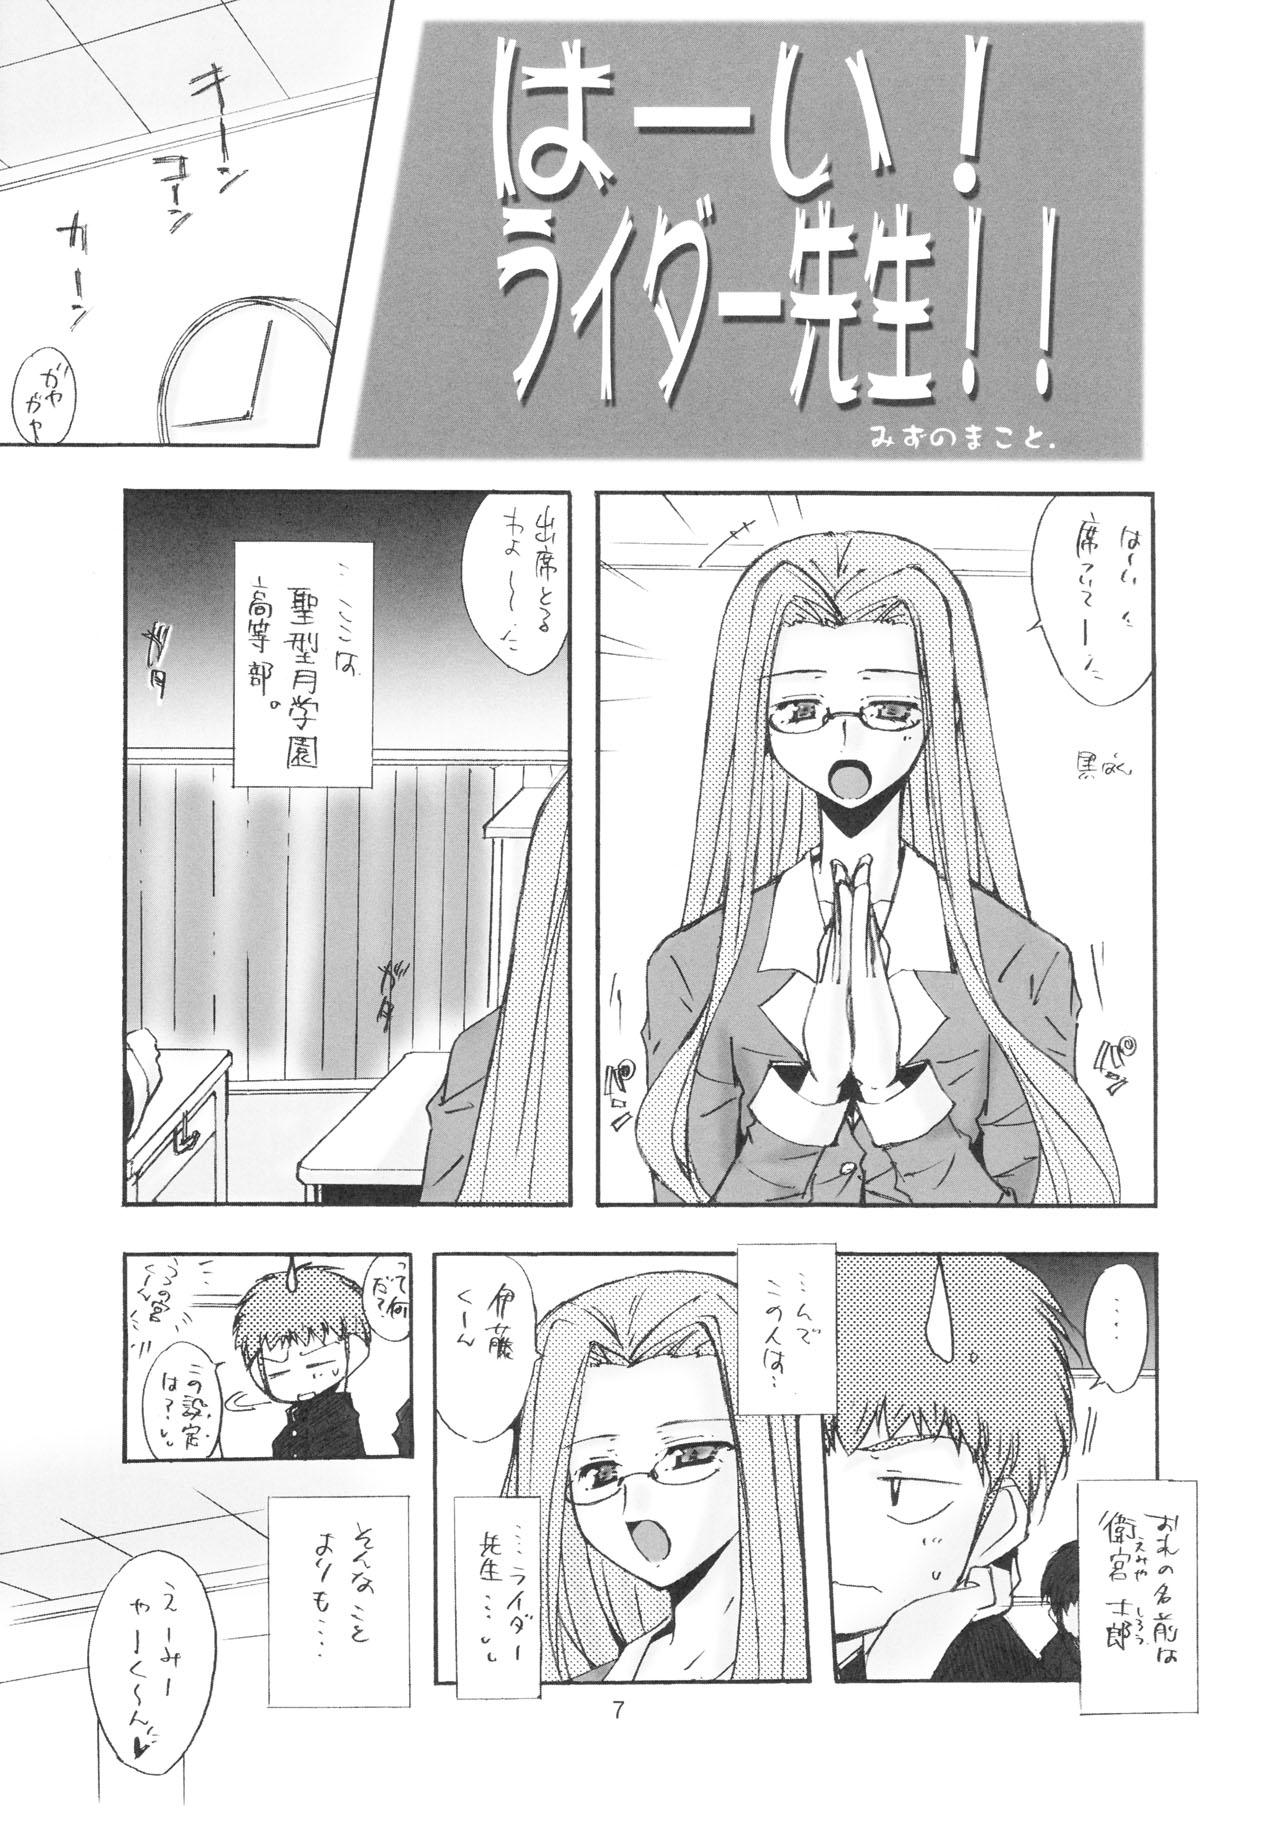 Riding Cock PURPLE DIGNITY - Fate stay night Time - Page 4